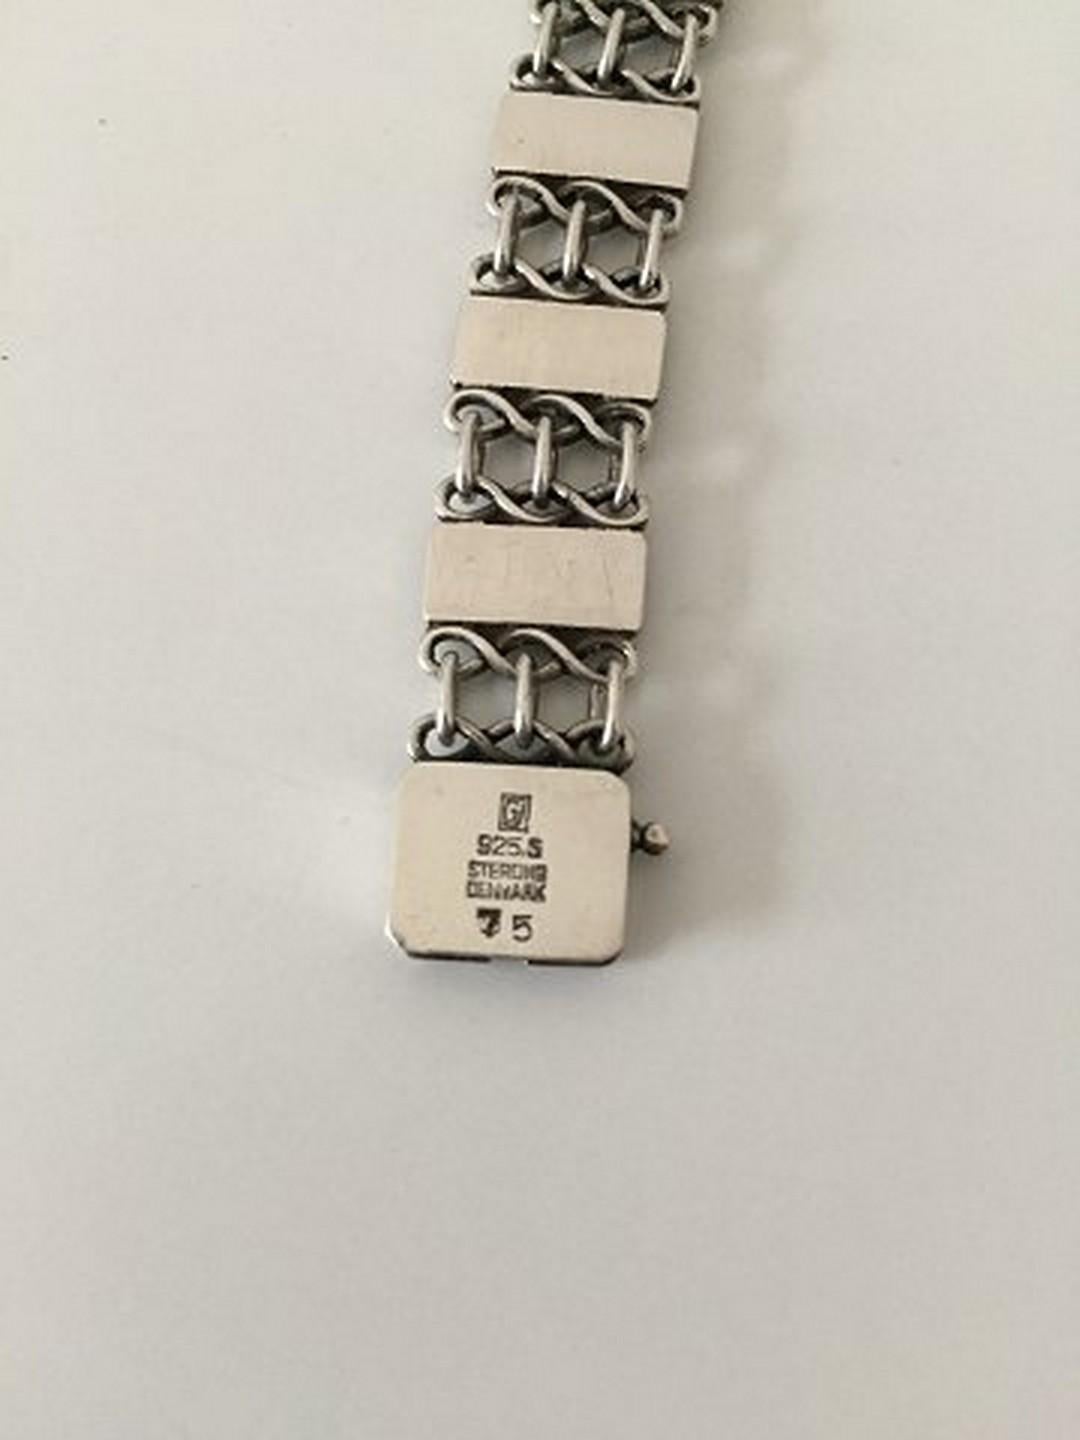 Georg Jensen Vintage Bracelet in Sterling Silver No 75. Measures 18.7 cm / 7 23/64 in. and is in good condition. From 1933-1944. Weighs 26 g / 0.90 oz.